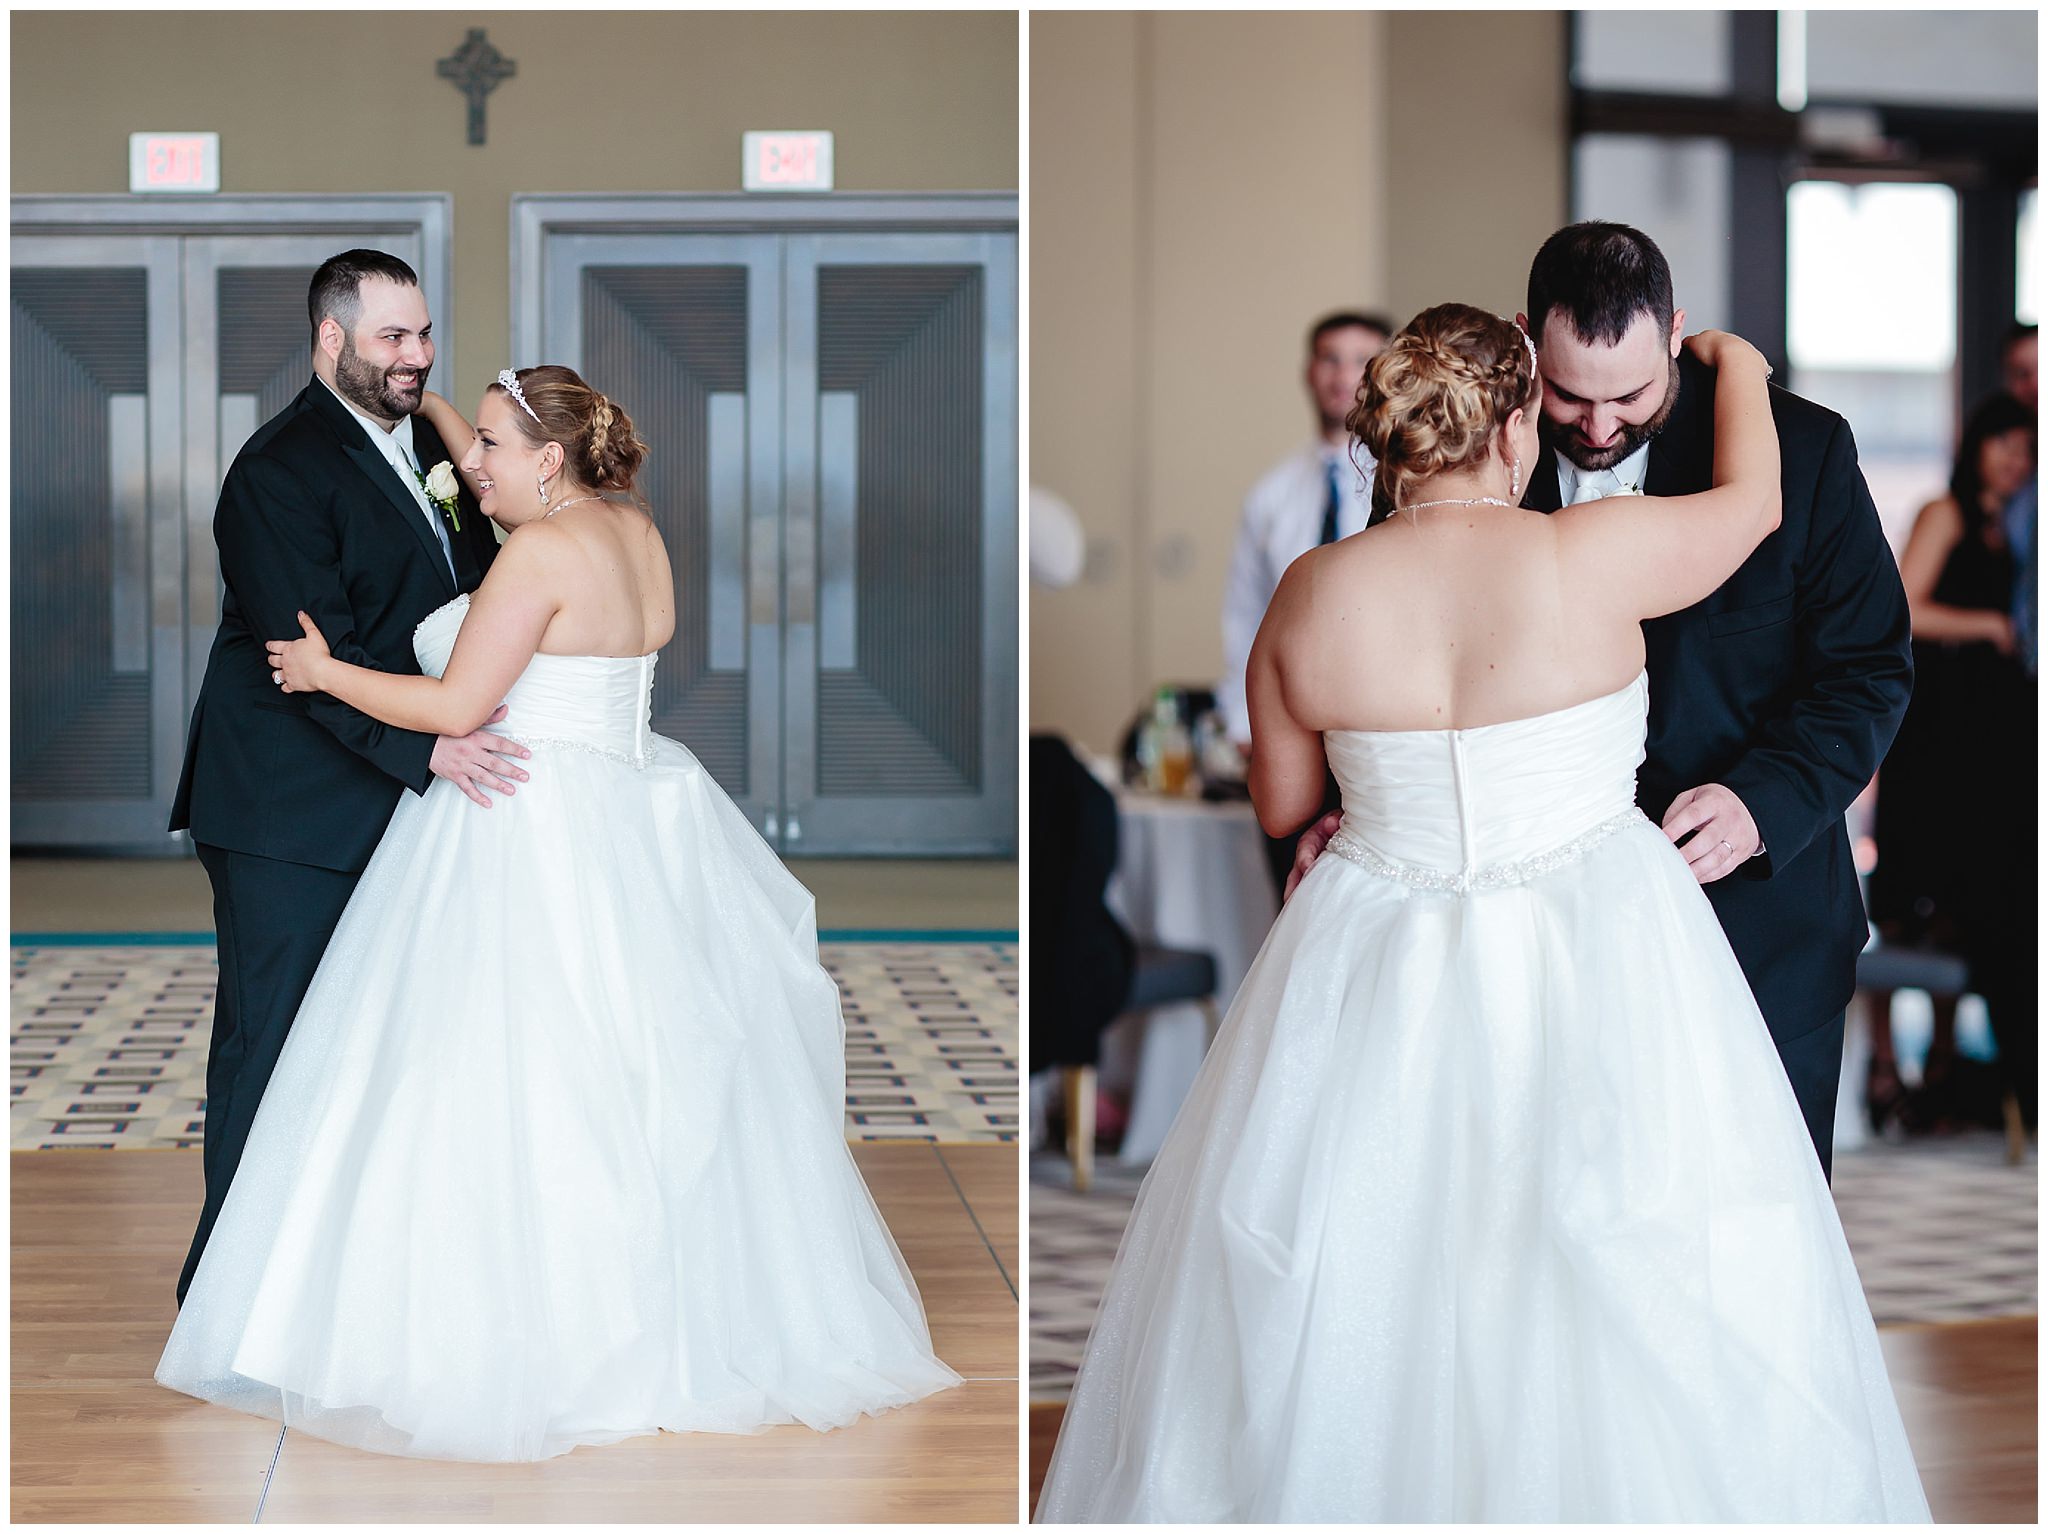 Newlyweds smiling during their first dance at Duquesne University